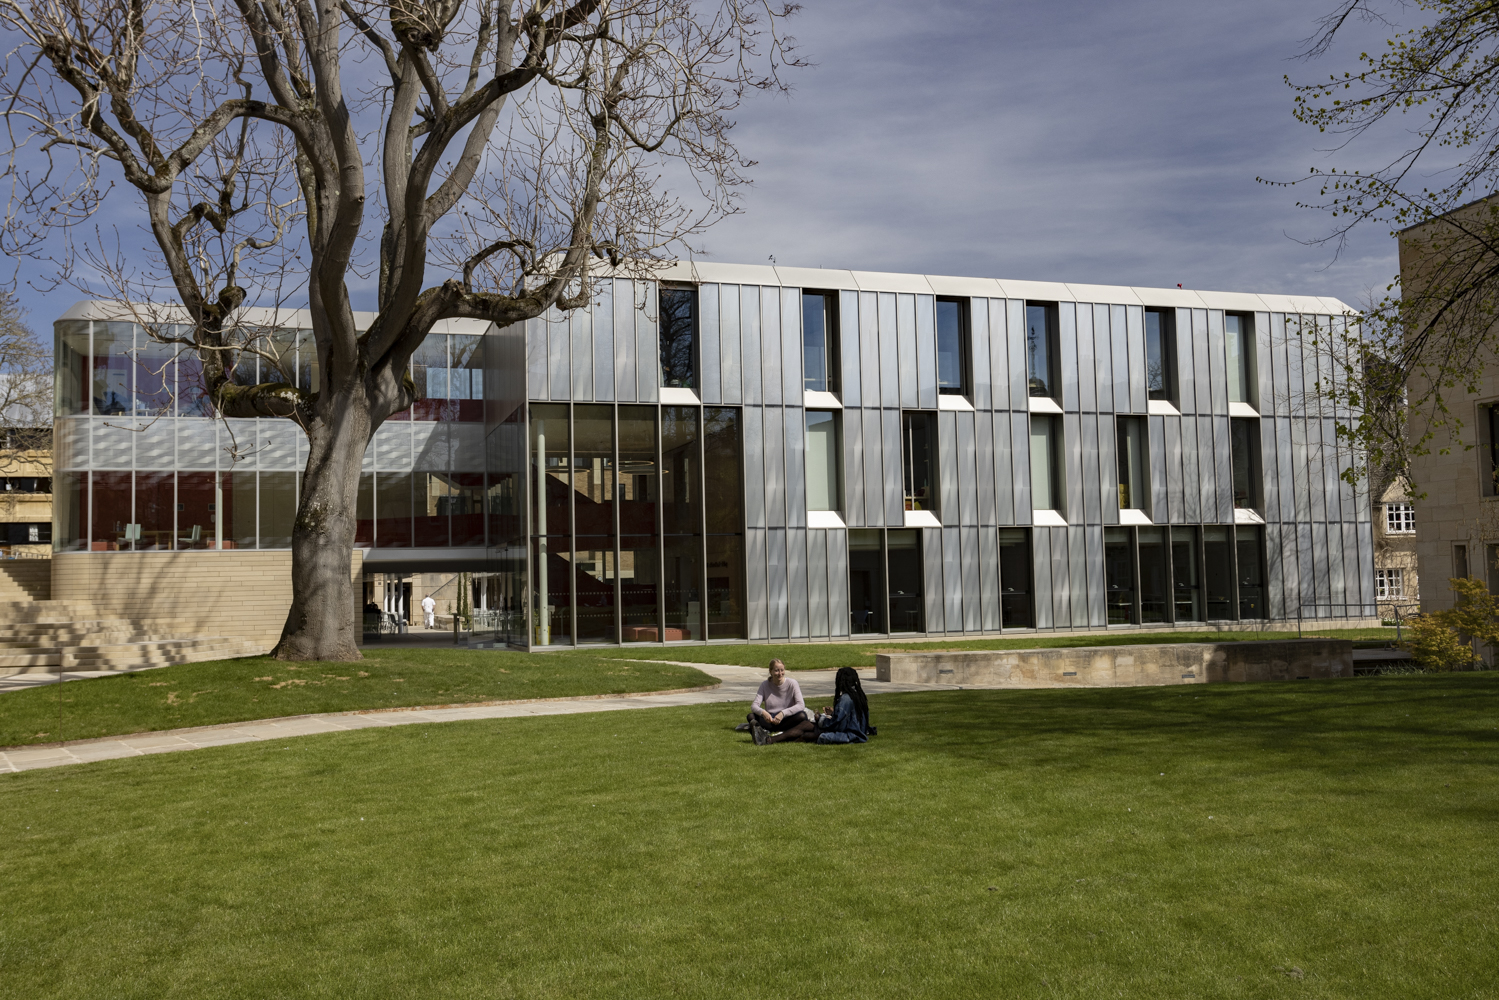 An impressive new student hub and learning facility for Wadham College